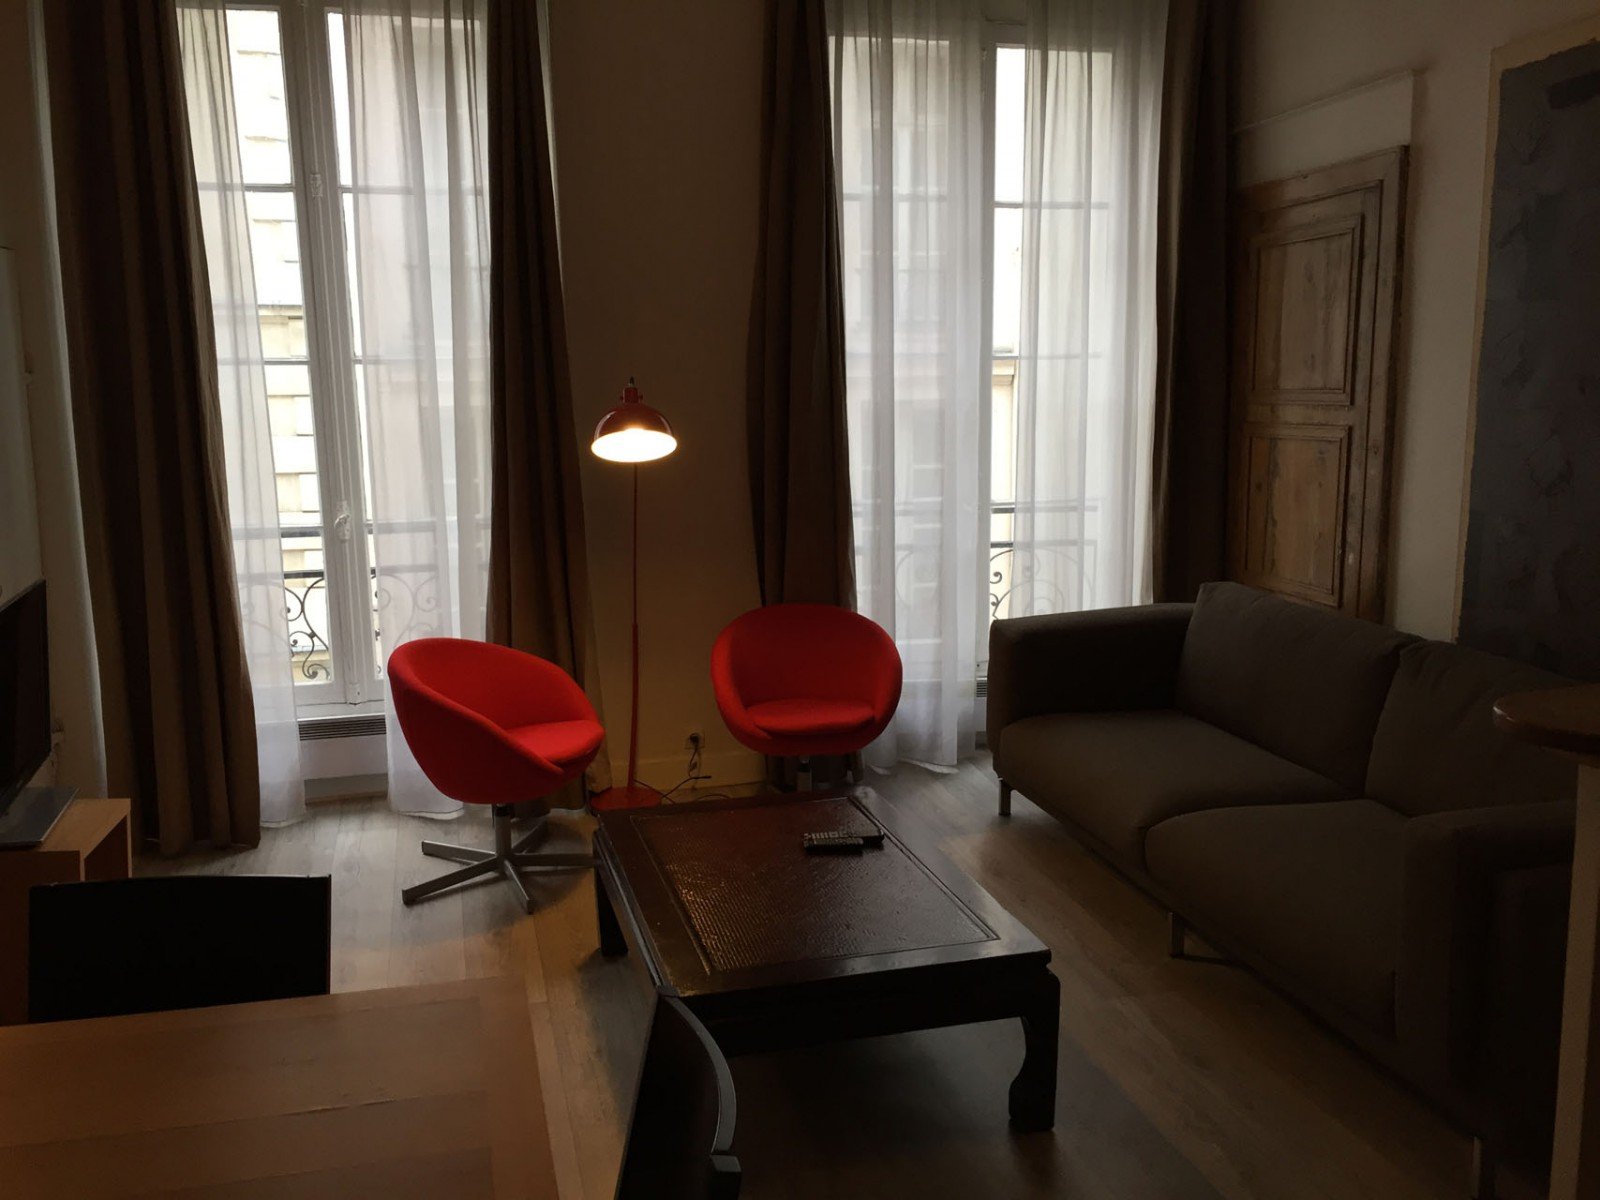 439/Nouvelle-mediatheque/Chambres/appt-2-chambres/201702/apt_2chambres_jeudepaumehotel_3.jpg